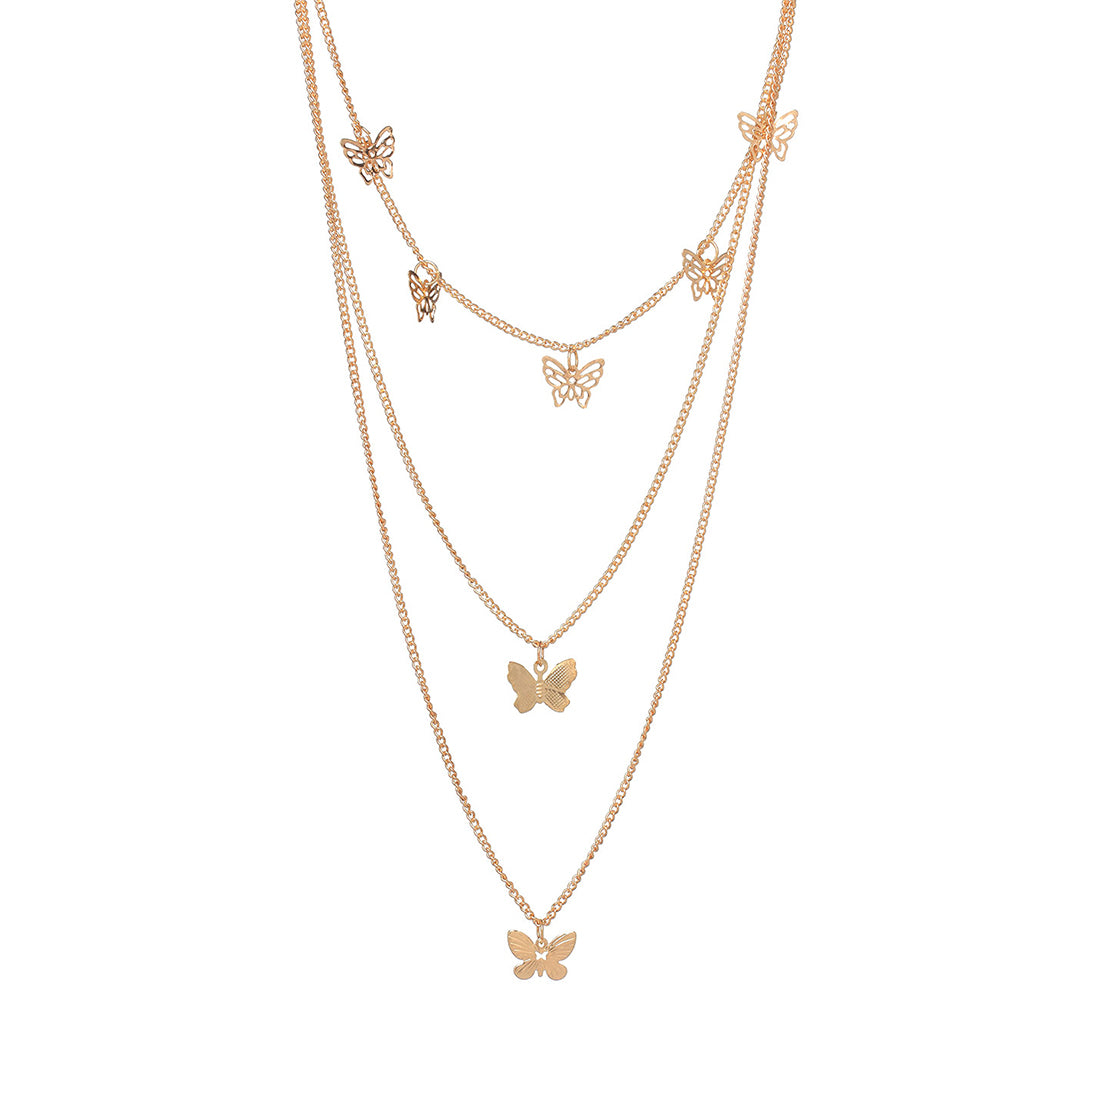 Triple Layer Gold Necklace - Multiple Flying Butterflies